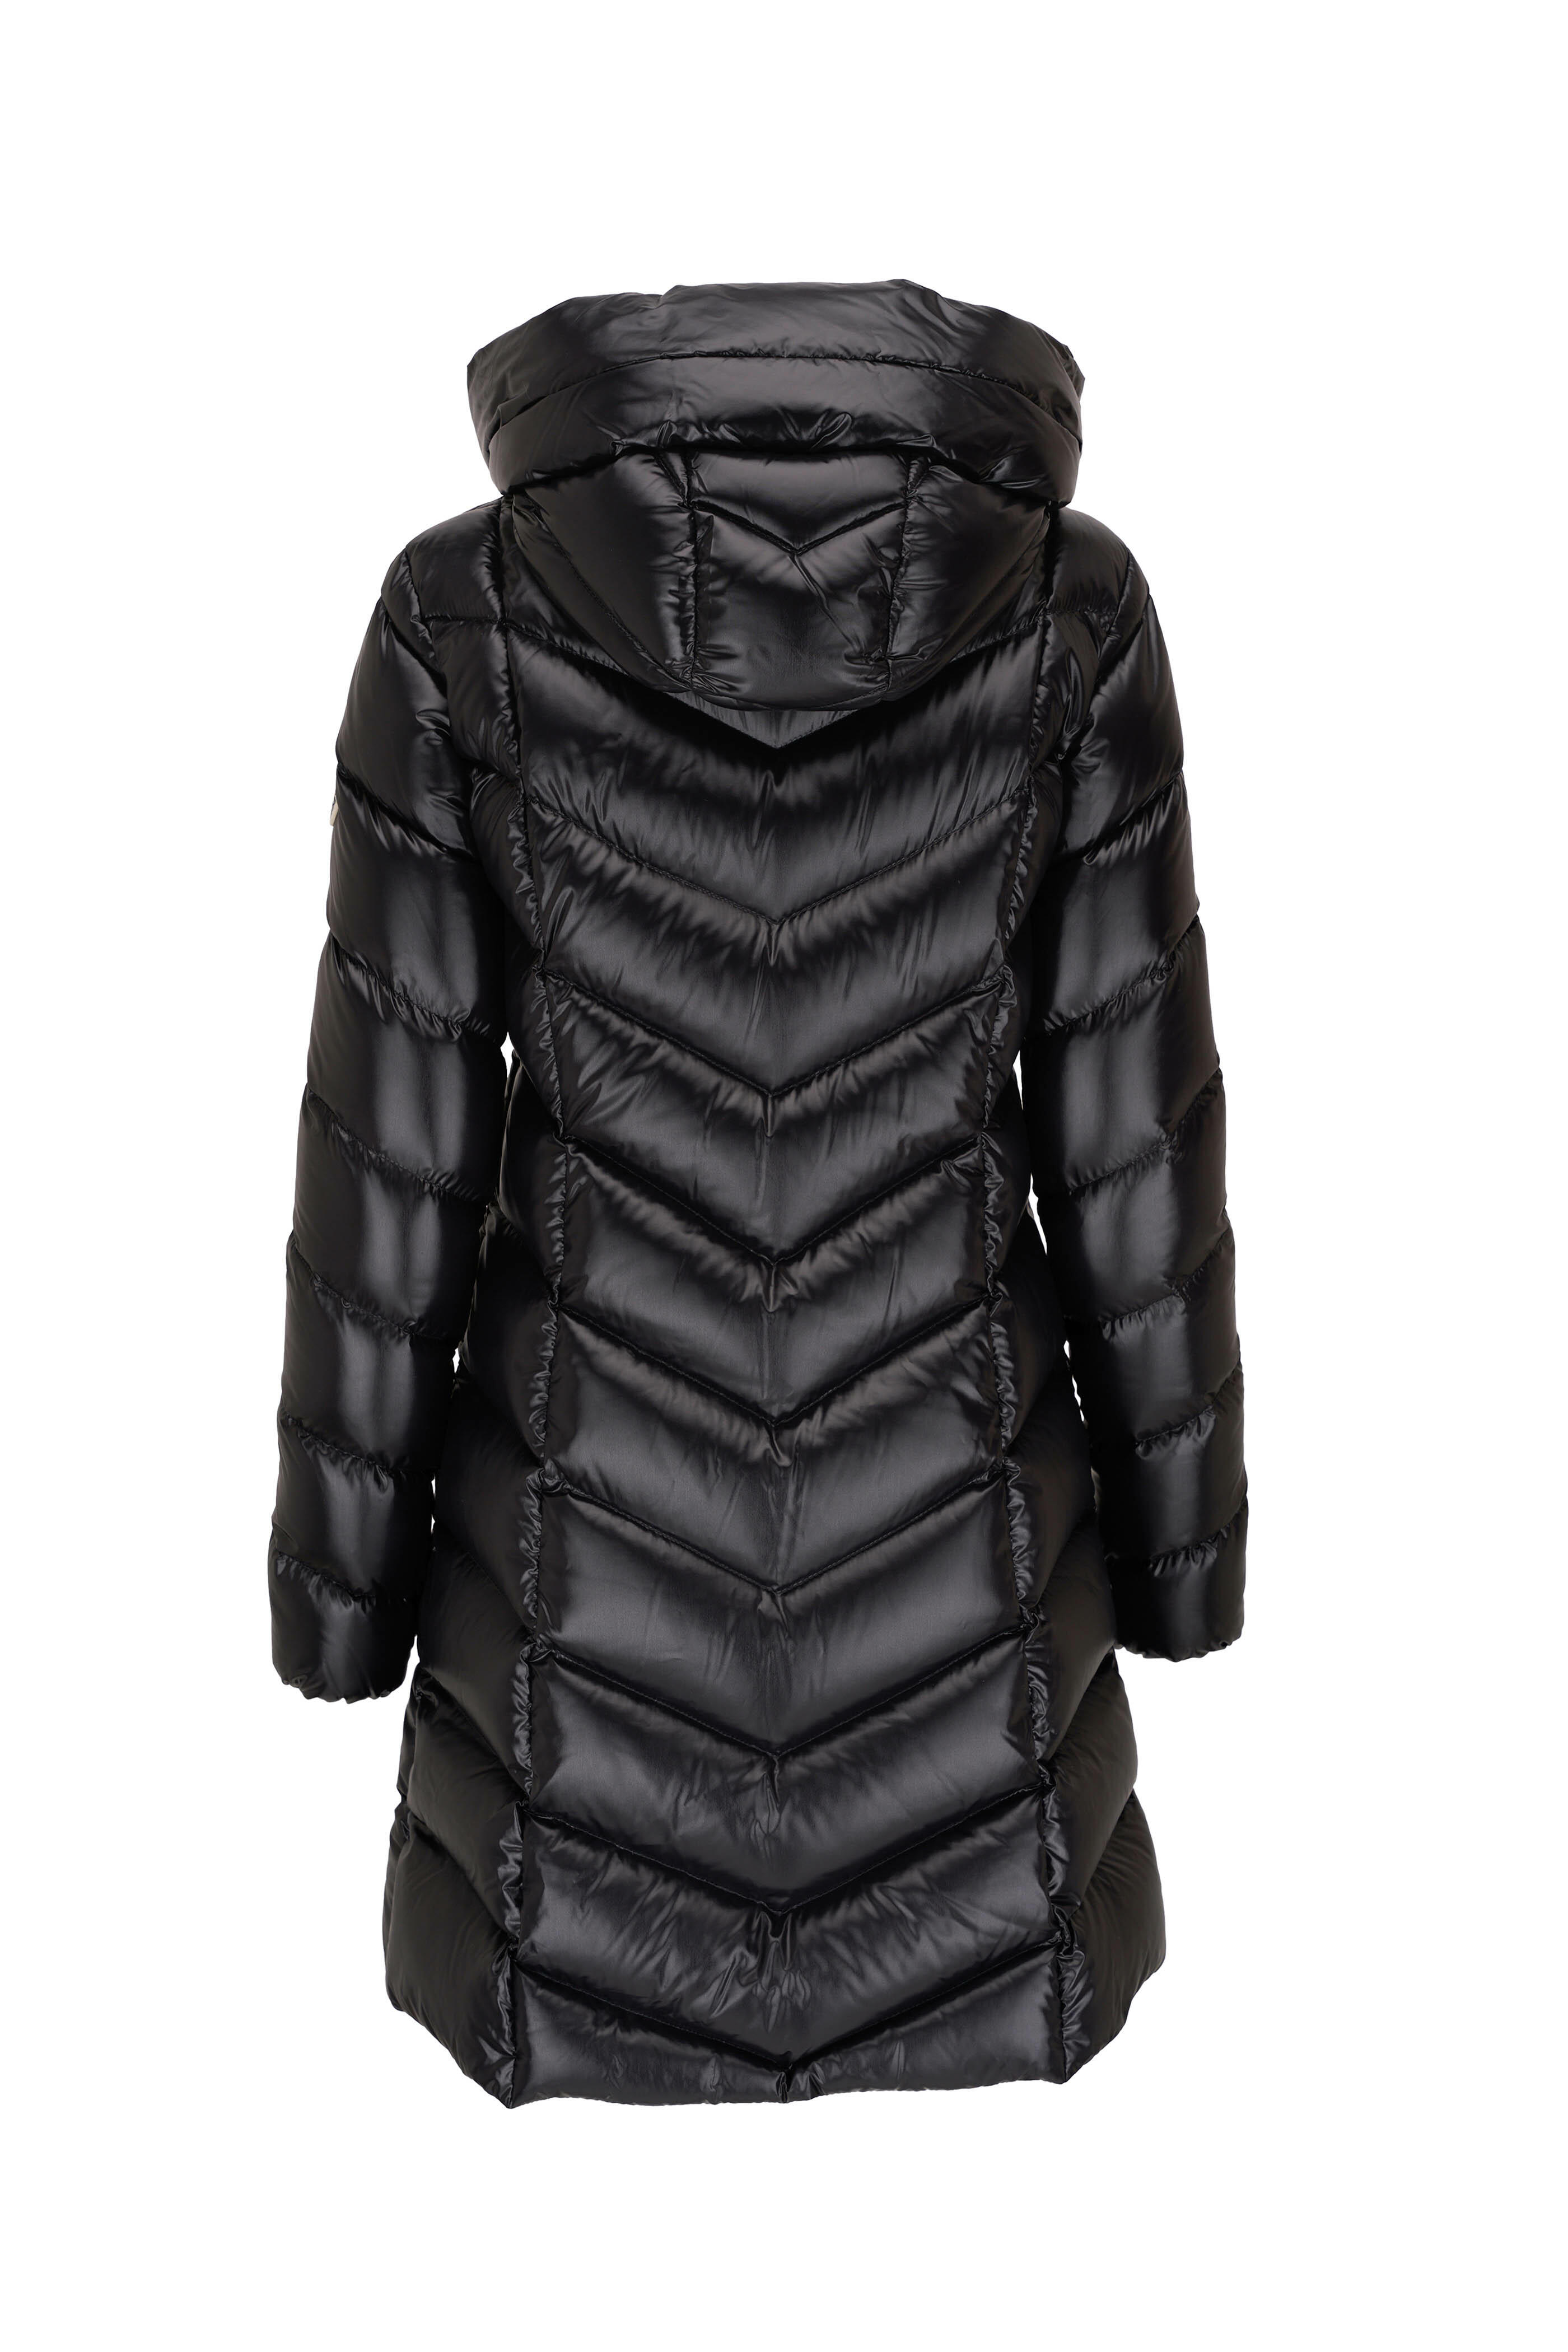 Moncler - Marus Shiny Black Long Fitted Parka | Mitchell Stores